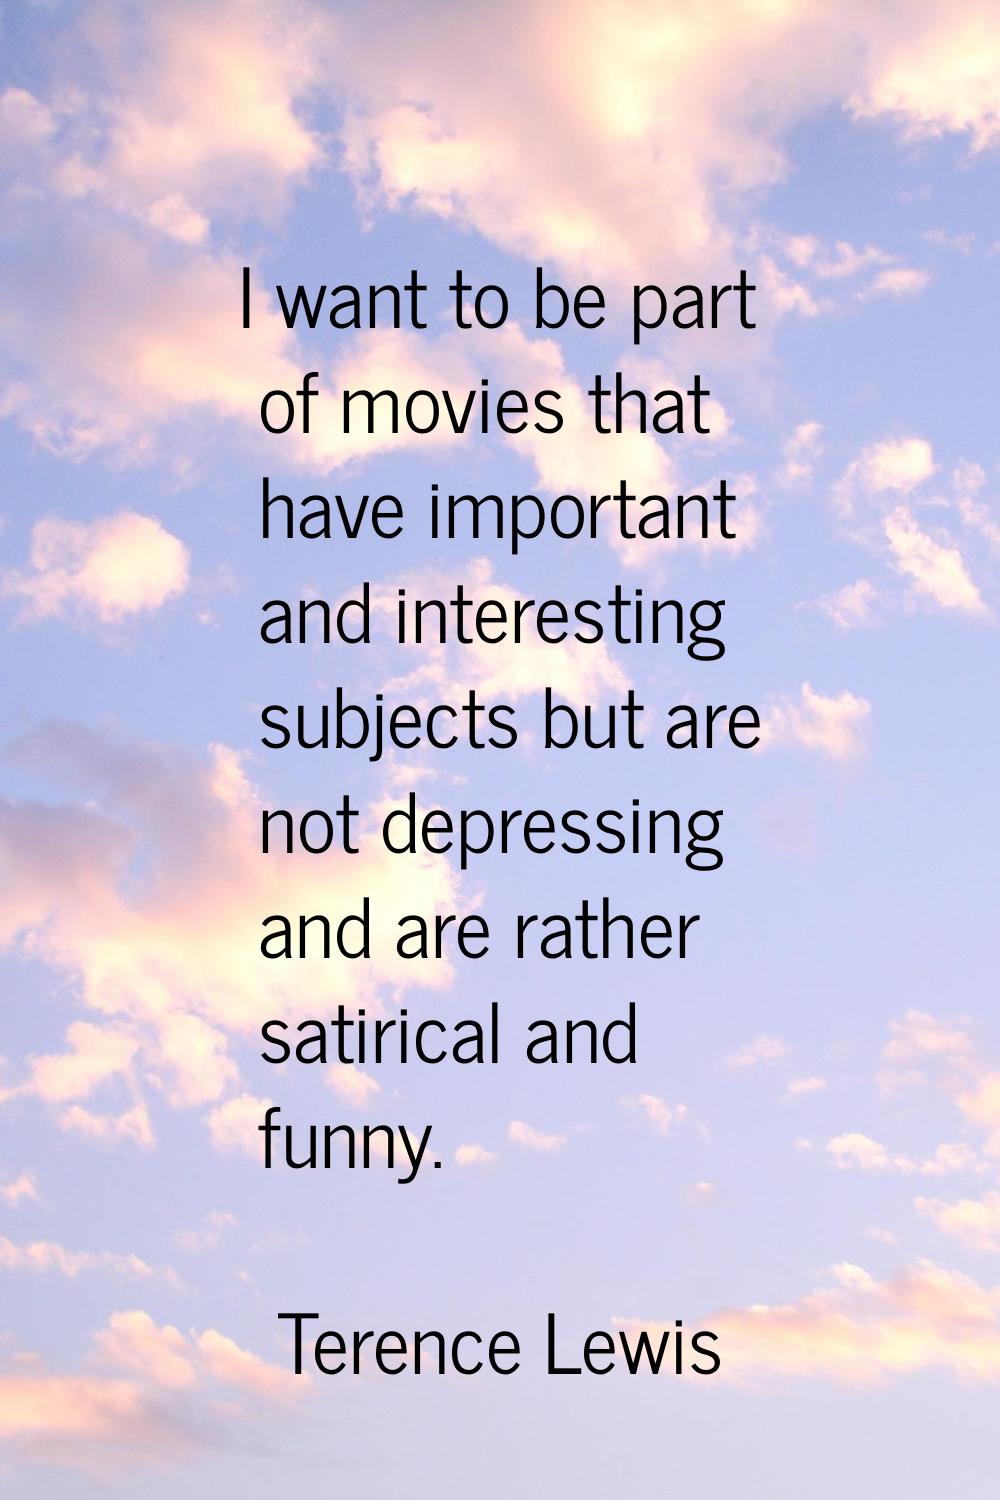 I want to be part of movies that have important and interesting subjects but are not depressing and